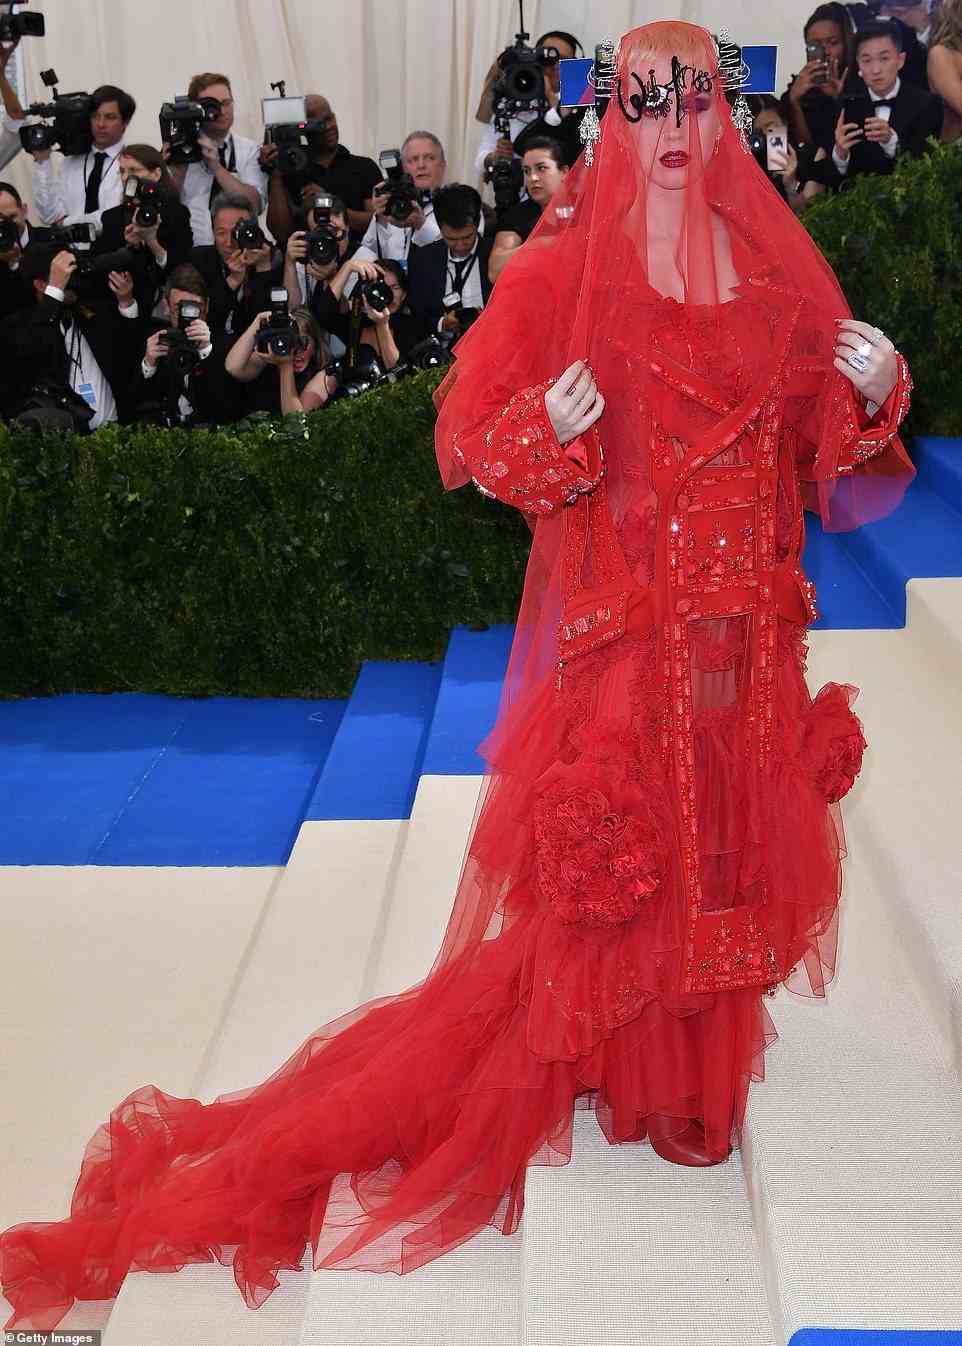 Katy Perry has always gone above and beyond in order to make a statement on the red carpet at the Met Gala - and her Maison Margiela Artisanal design for 2017 was no exception